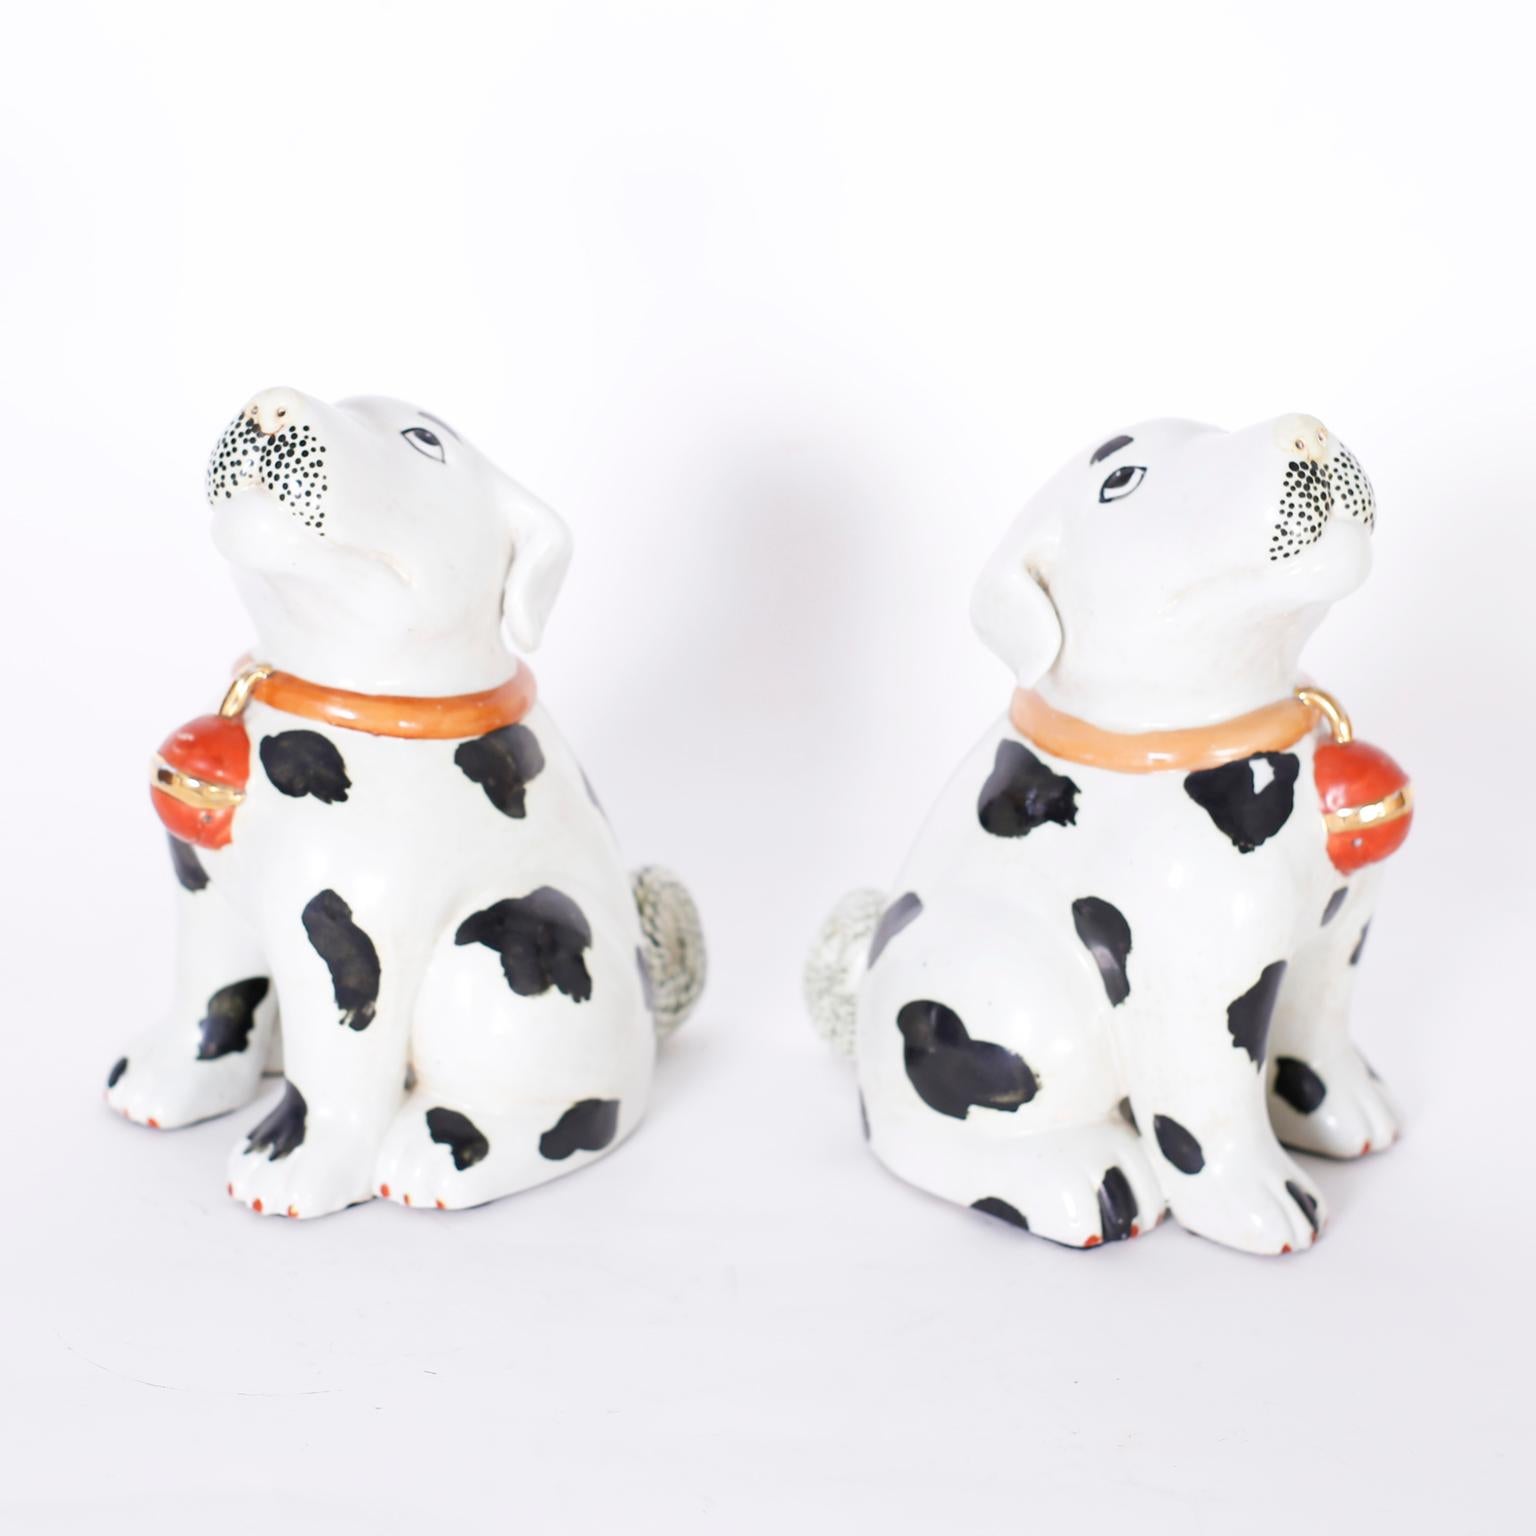 Pair of Chinese porcelain puppies or Dalmatians with collars and bells, striking a familiar puppy pose. Signed with chop marks on the bottom.